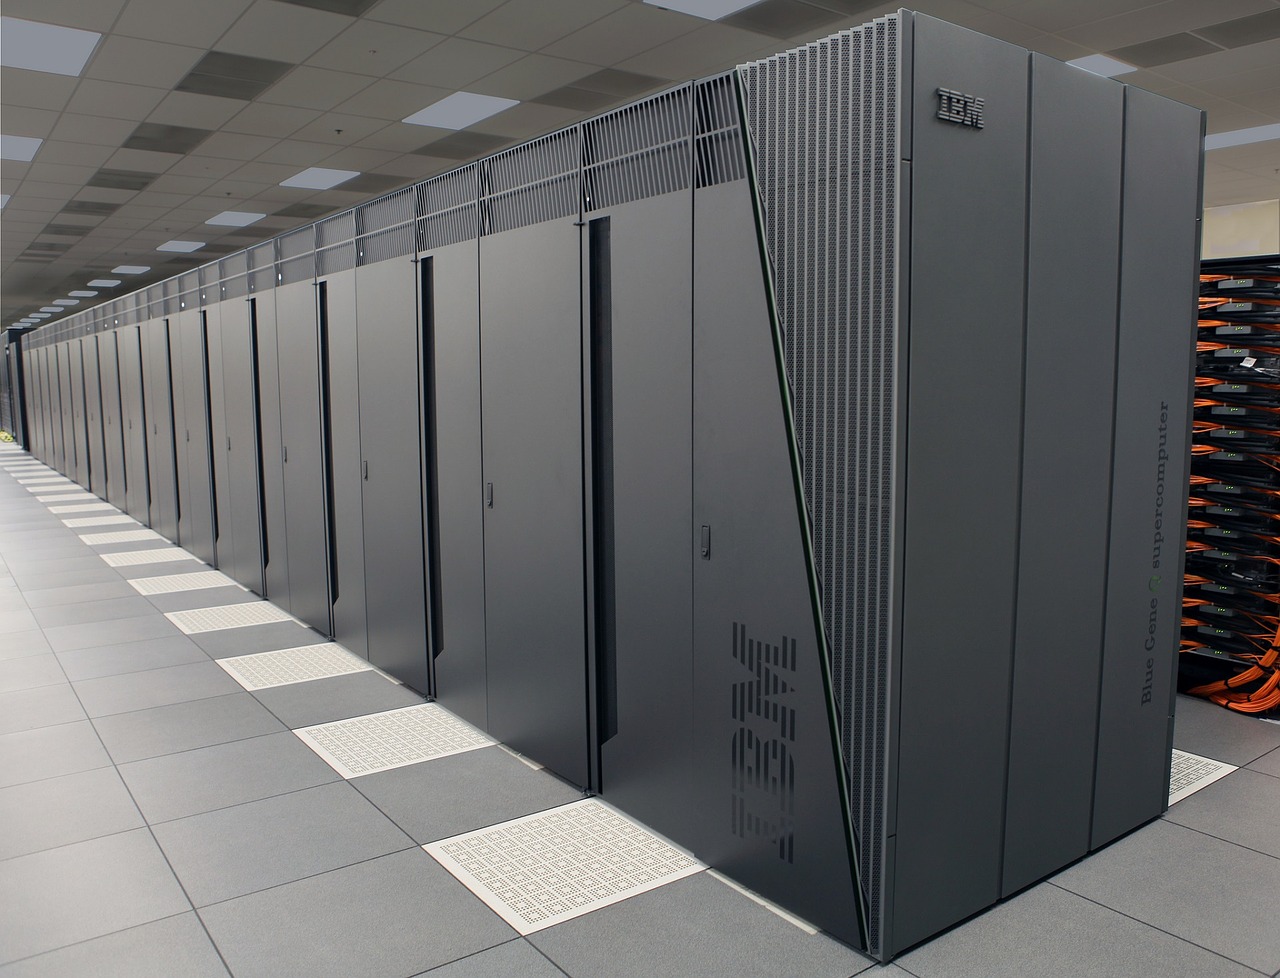 IBM spins off IT services to focus on hybrid cloud computing